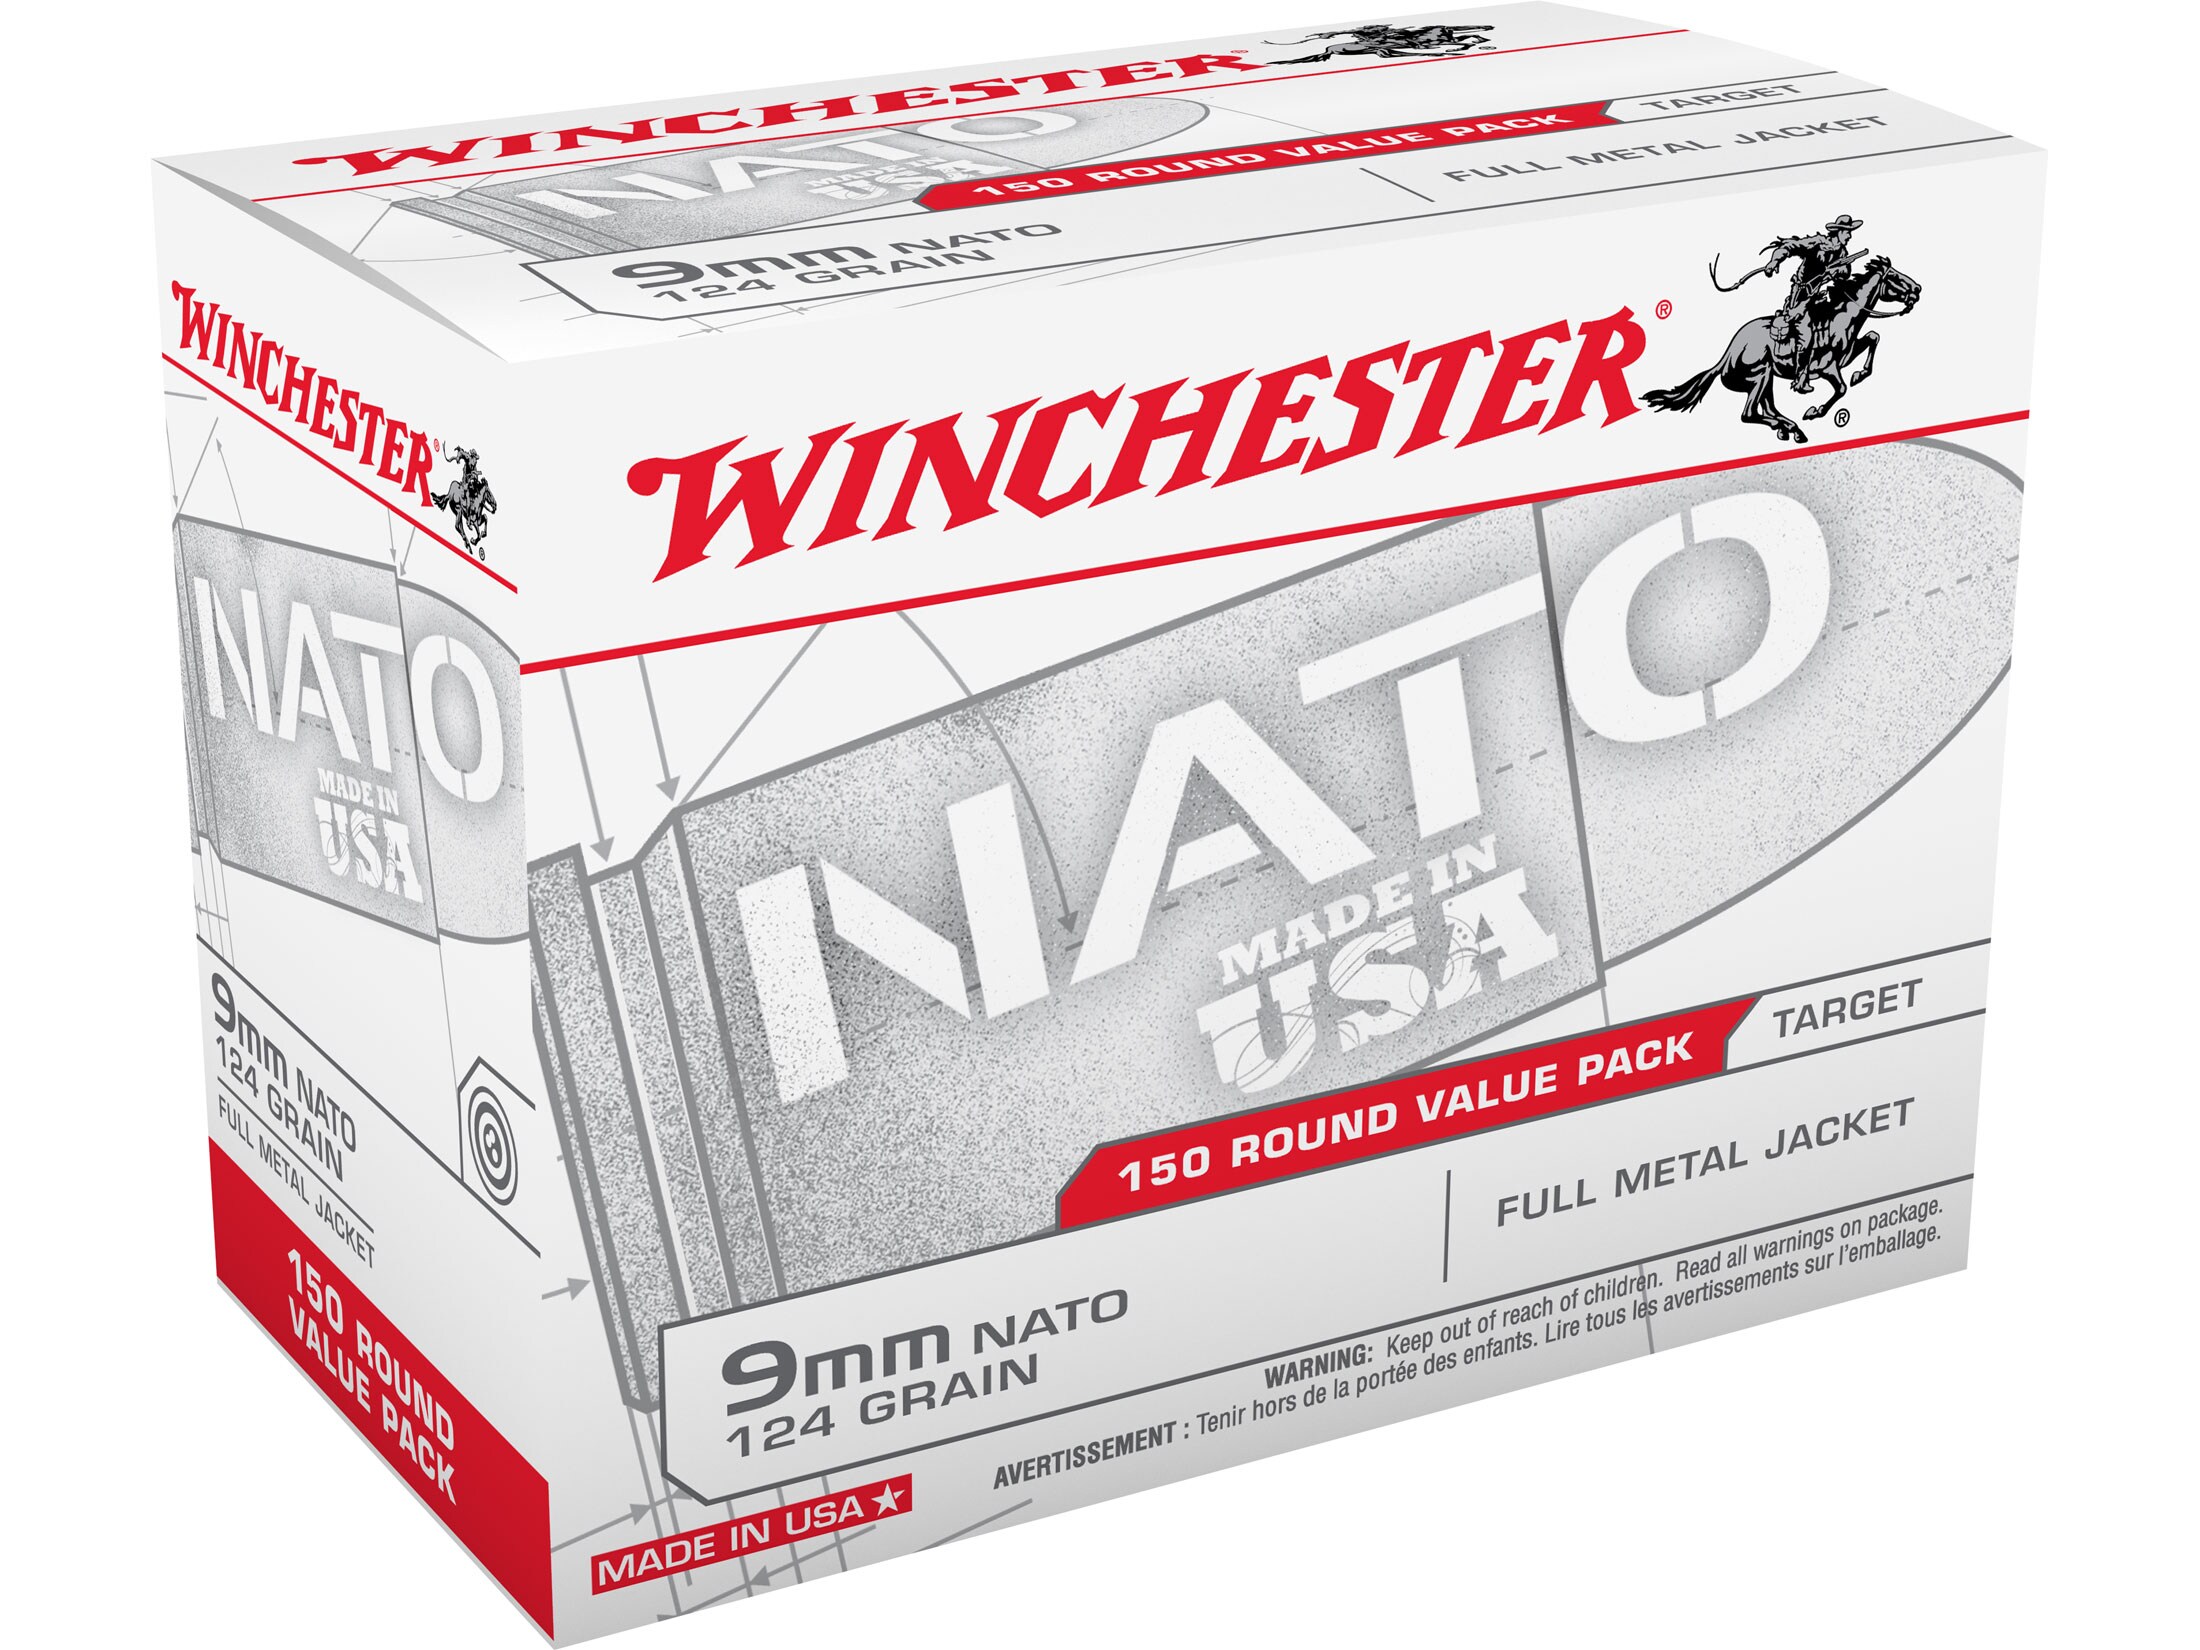 Winchester NATO Ammo 9mm Luger 124 Grain Full Metal Jacket Box of 150